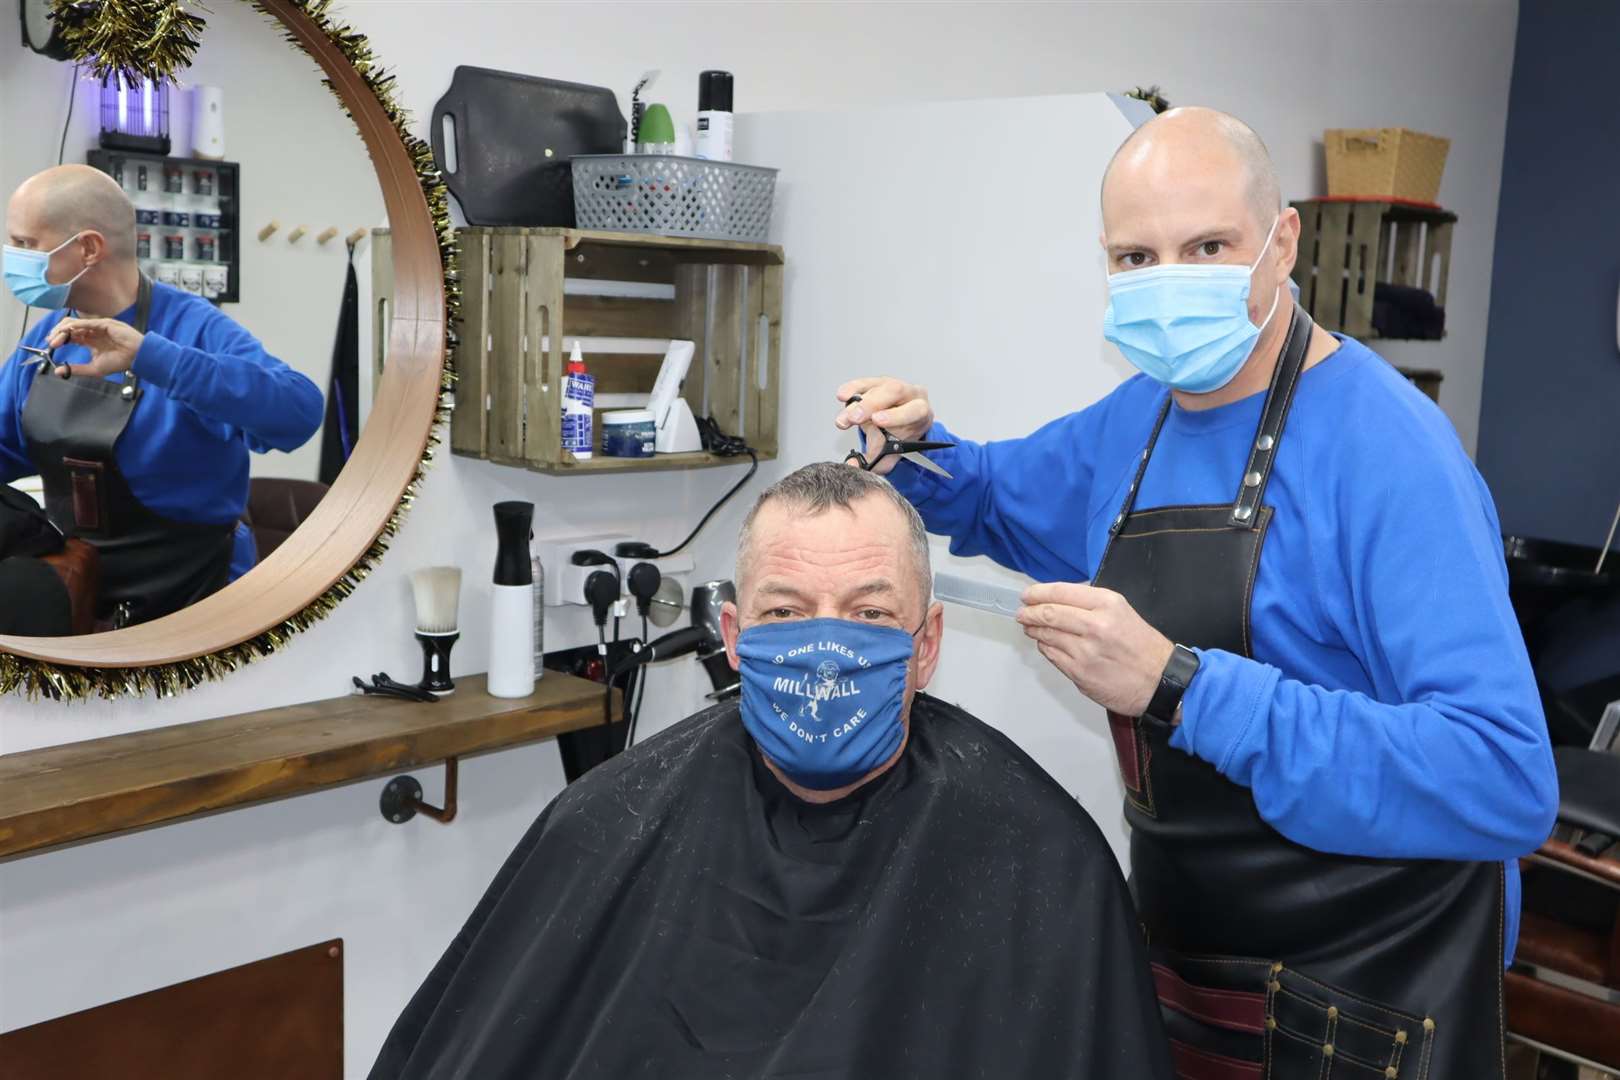 Colin Bastable of Capelli Salon in Sheerness High Street pictured with customer Ian Hardley